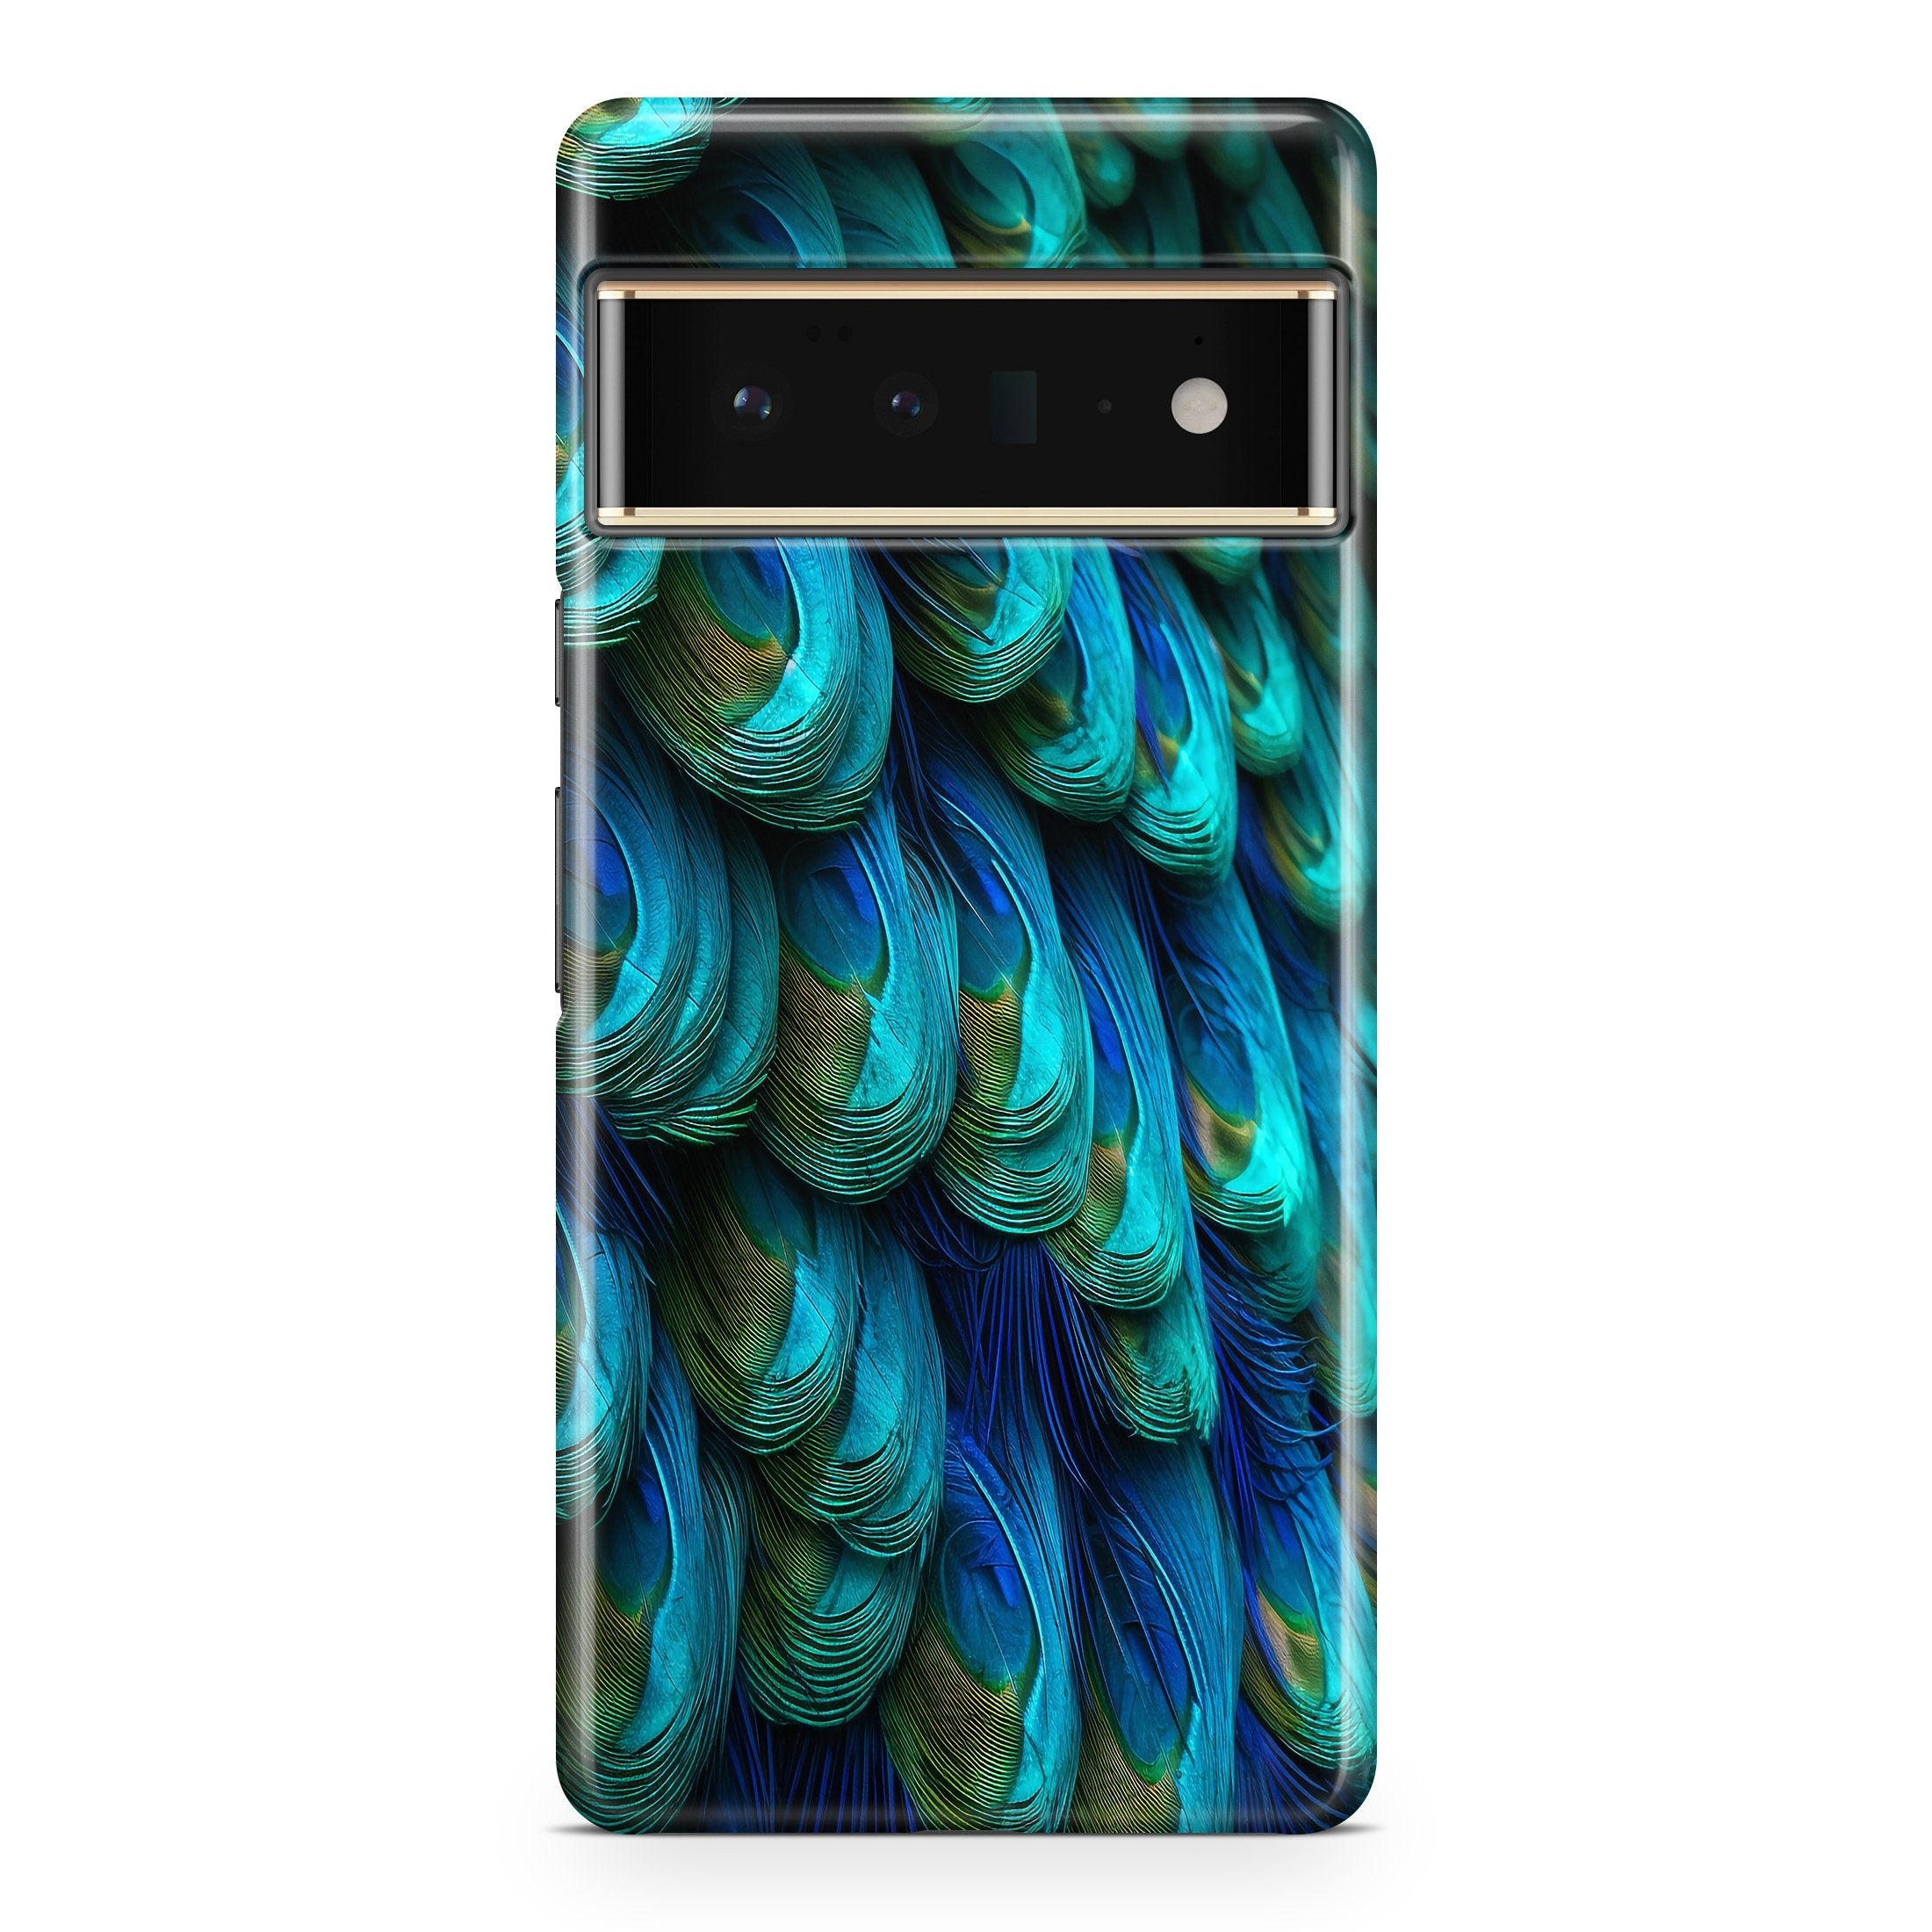 Specter Blue Dragonscale - Google phone case designs by CaseSwagger